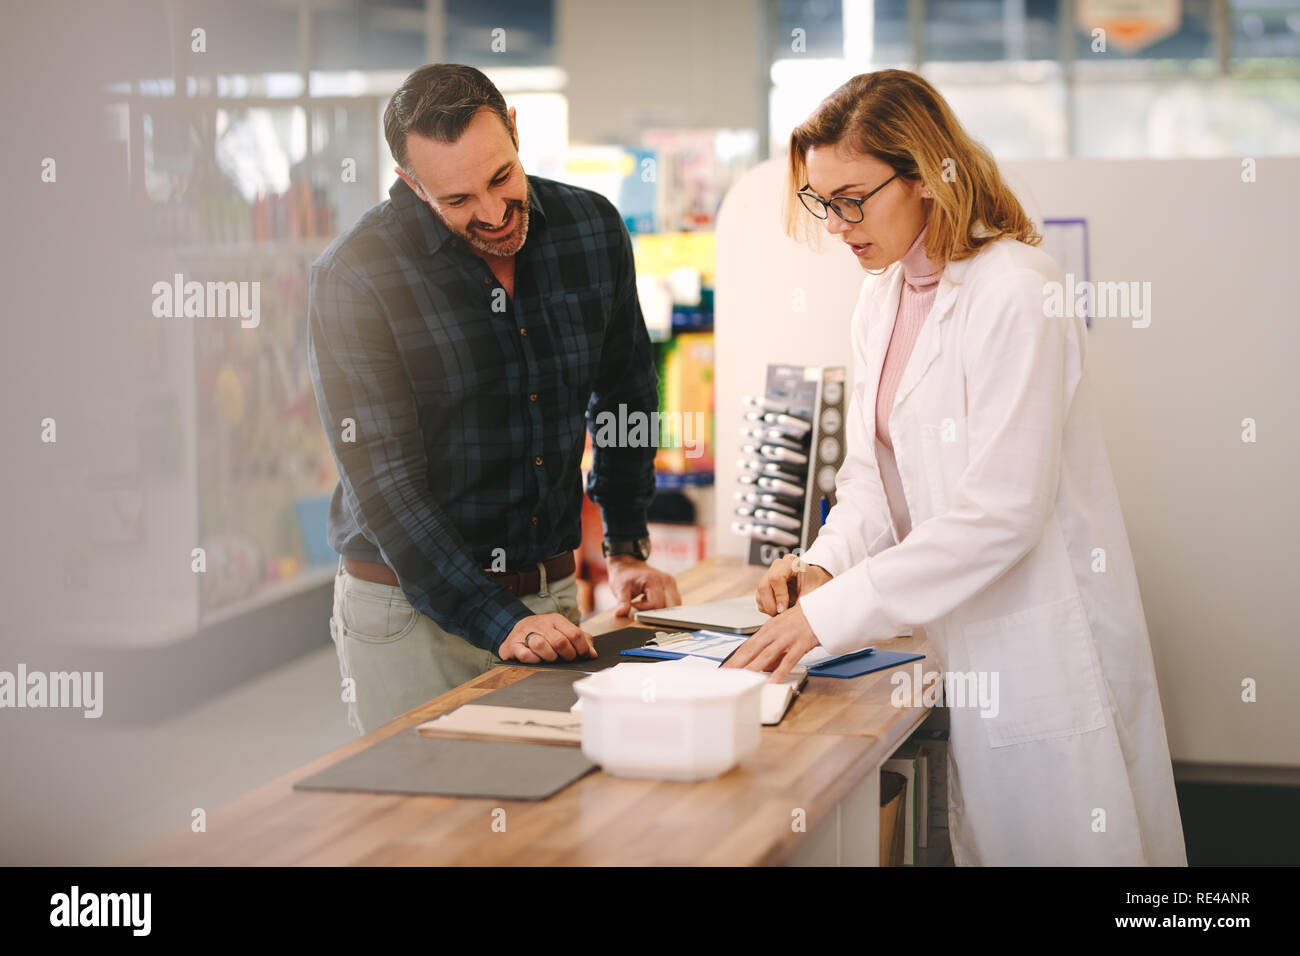 Female pharmacist explains a prescription to customer. Chemist assisting a customer standing at the counter. Stock Photo